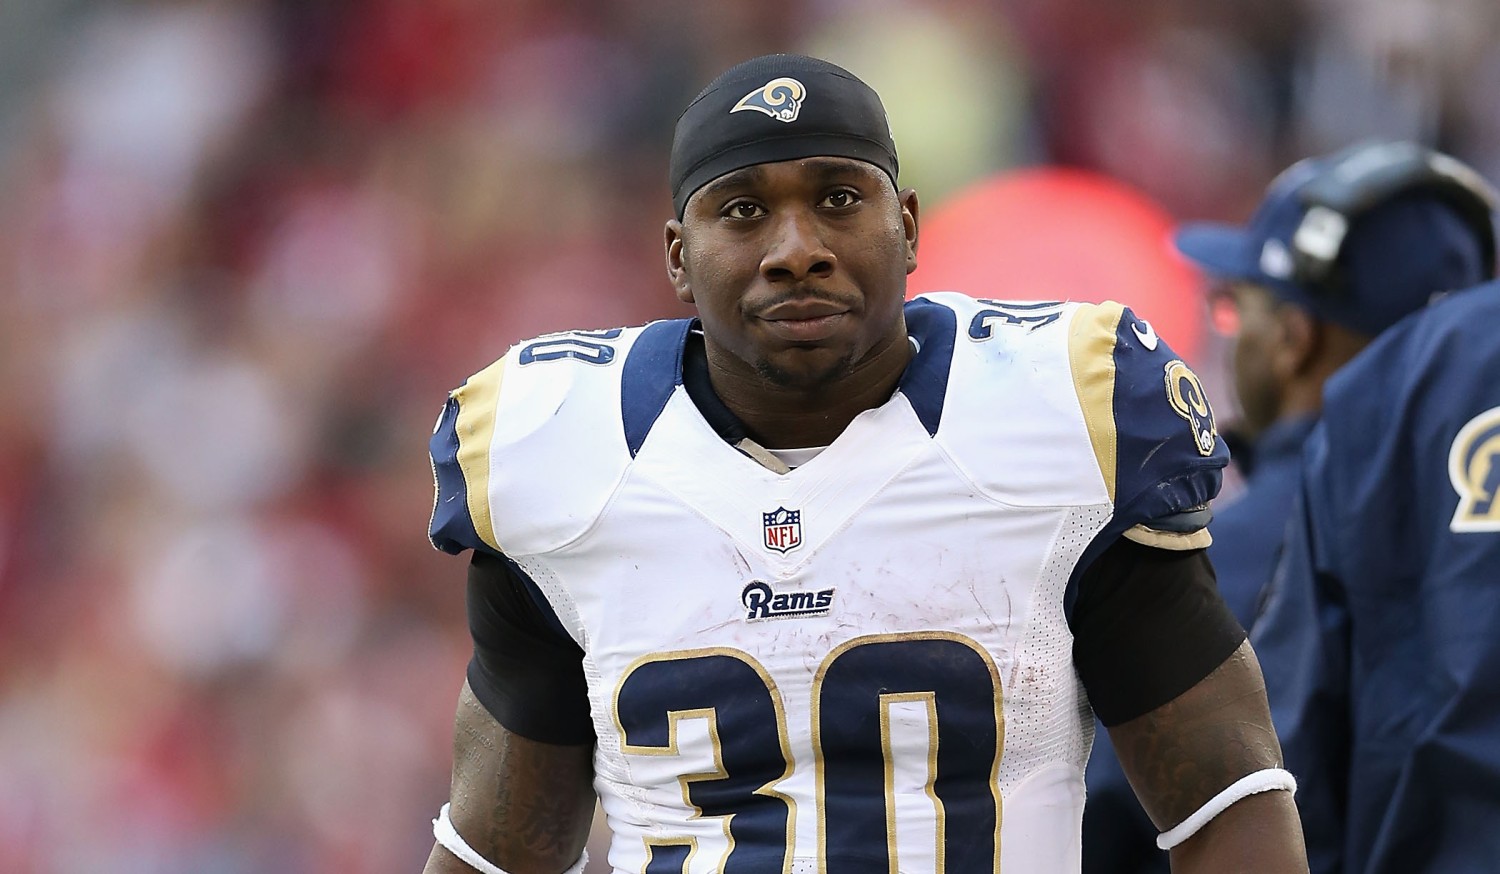 Former Nfl Player Zac Stacy Arrested After Video Appears To Show Assault On Ex Girlfriend